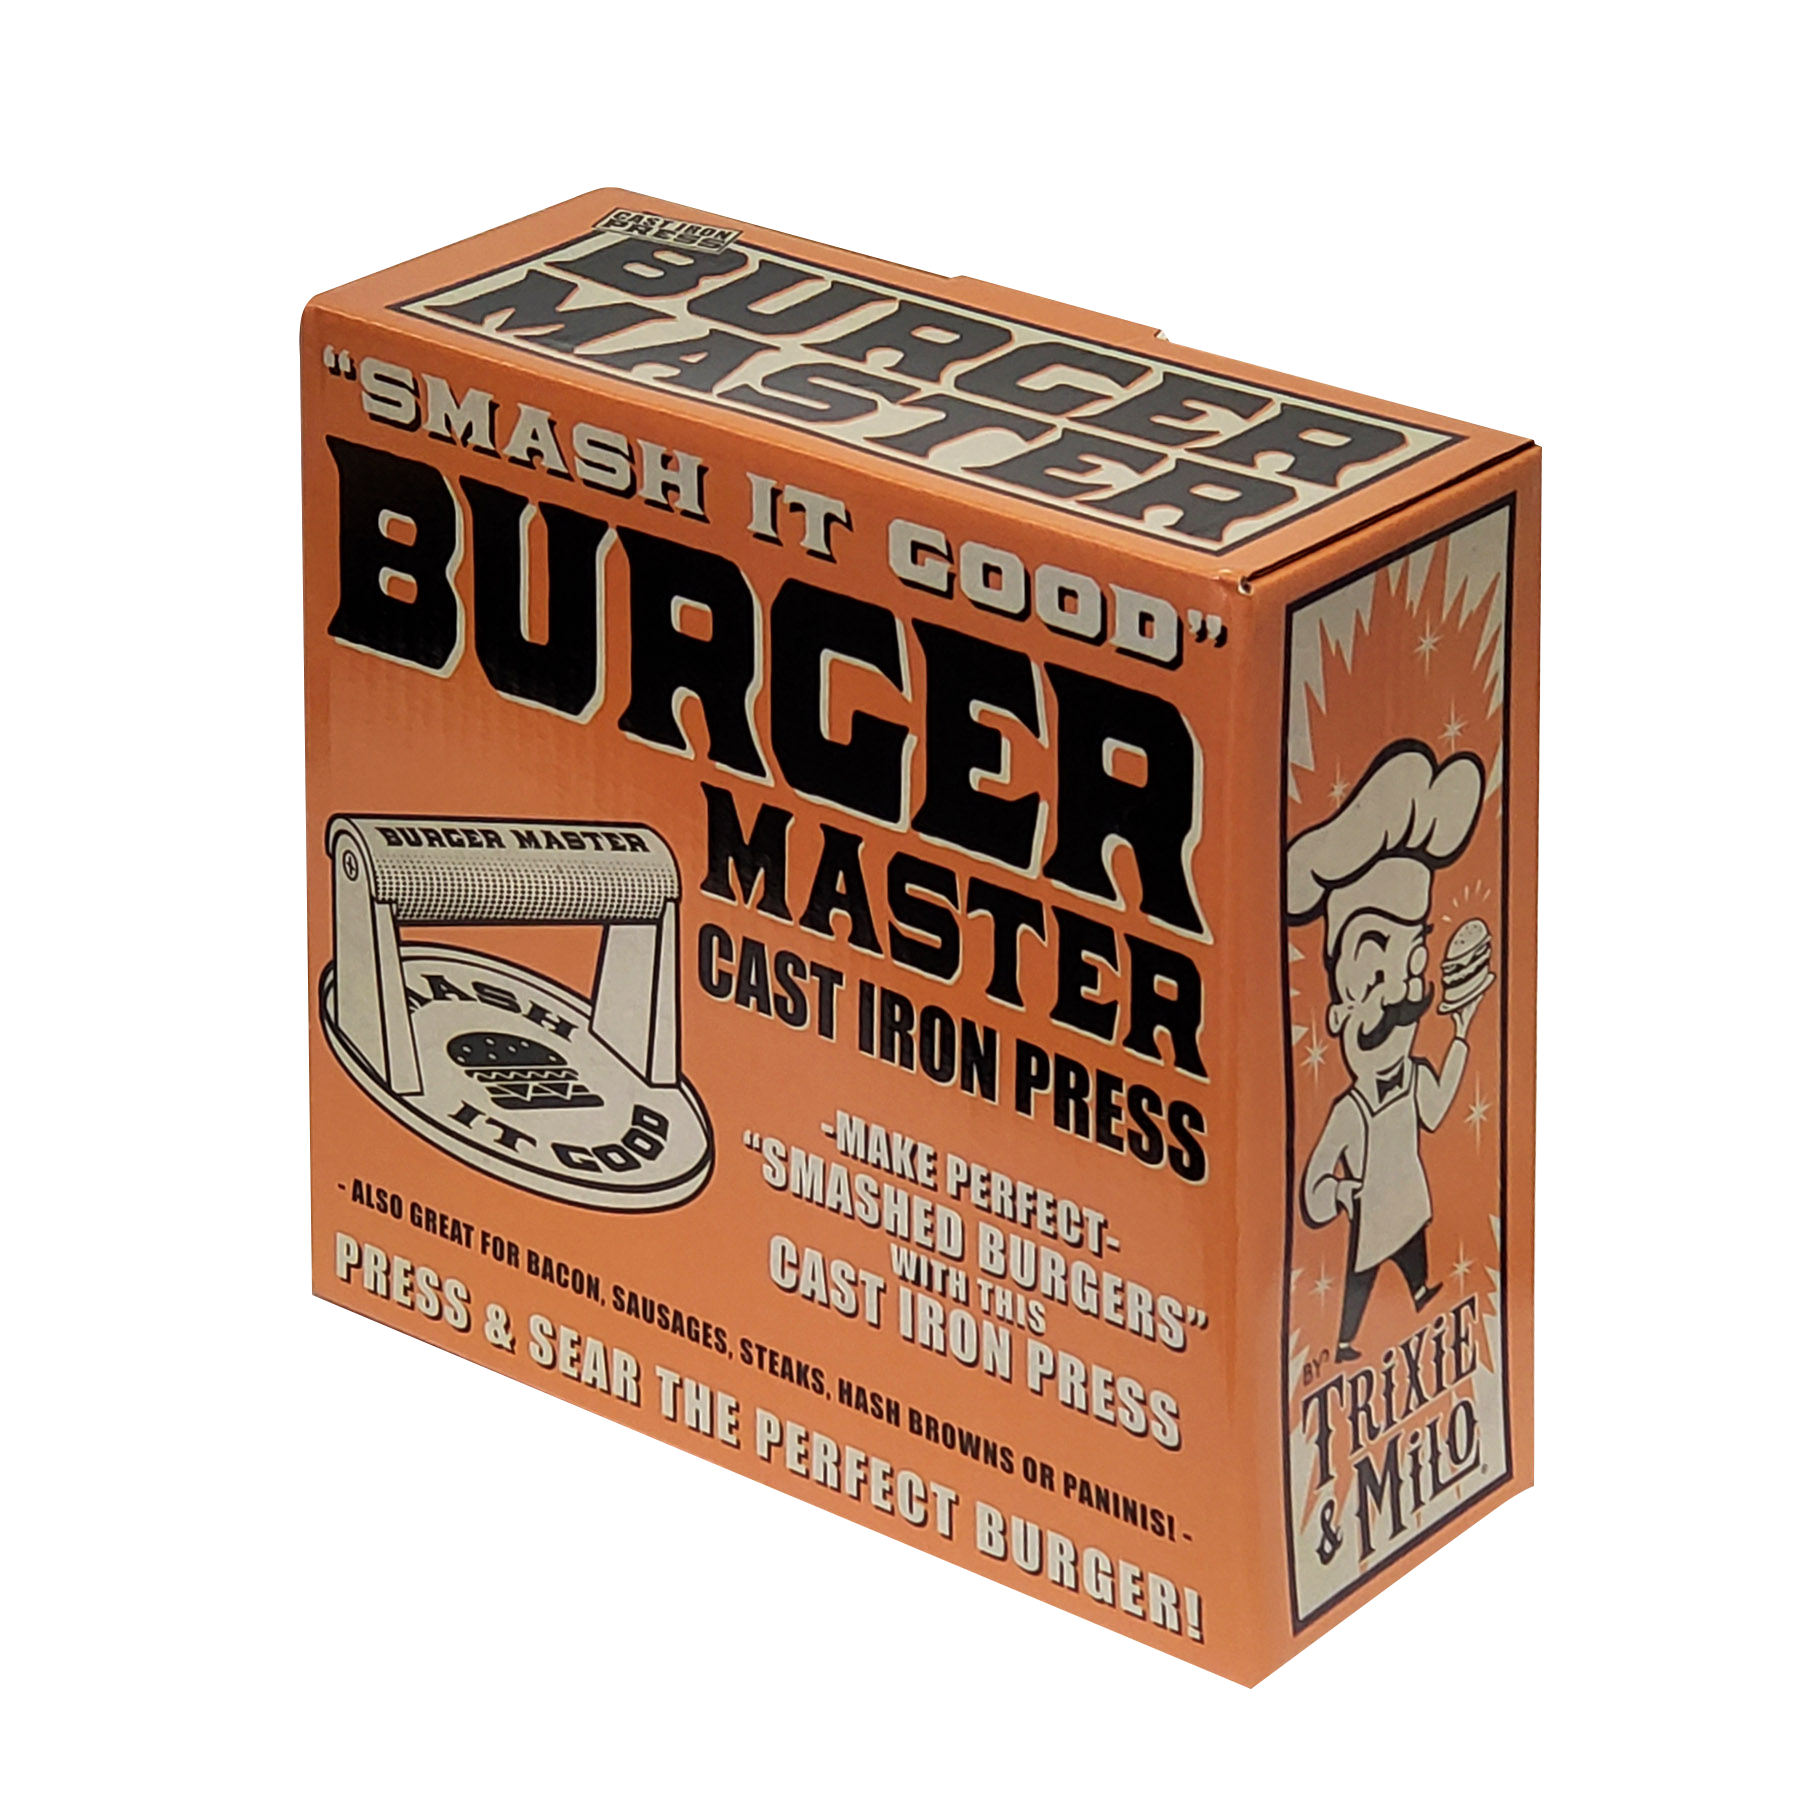 "Burger Master" Cast Iron Grill Press Smashburgers near me, anyone? Get smashed burgers at home, anytime! Perfect for any backyard BBQ grill boss or just to impress your friends at tailgate parties.